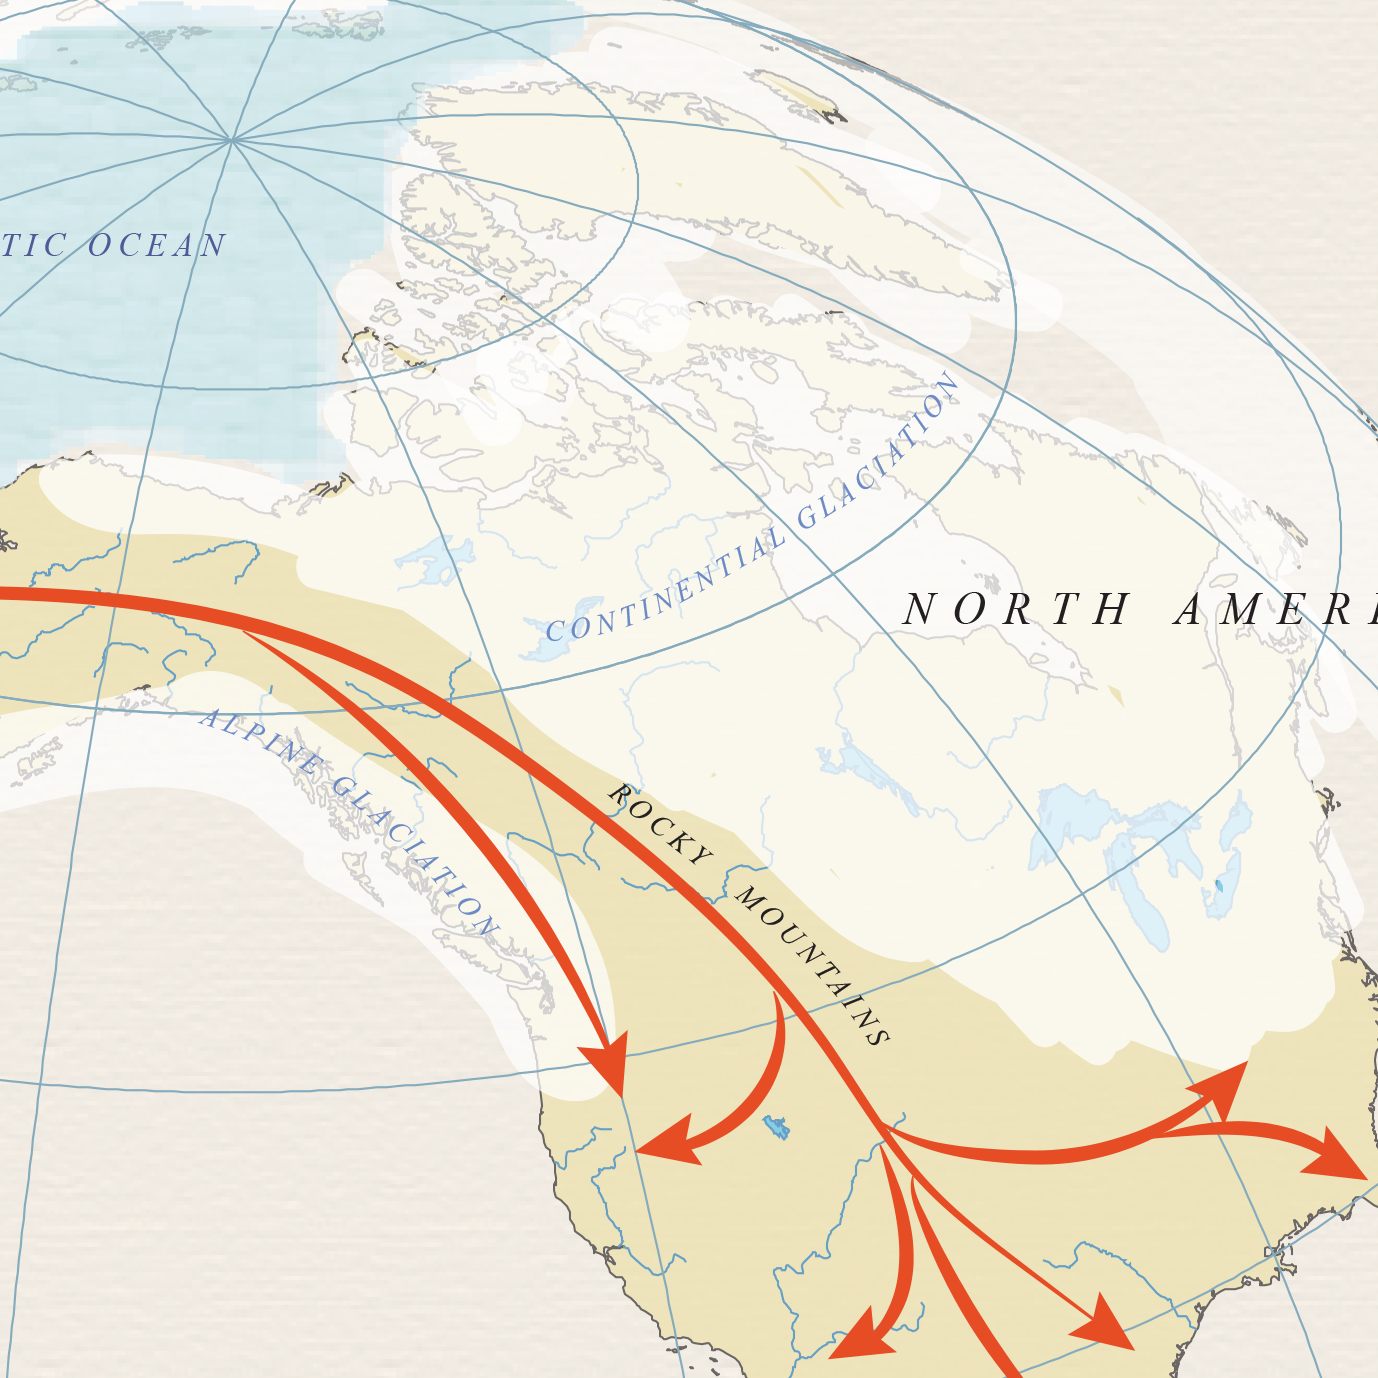 Early Human Migartion to North America